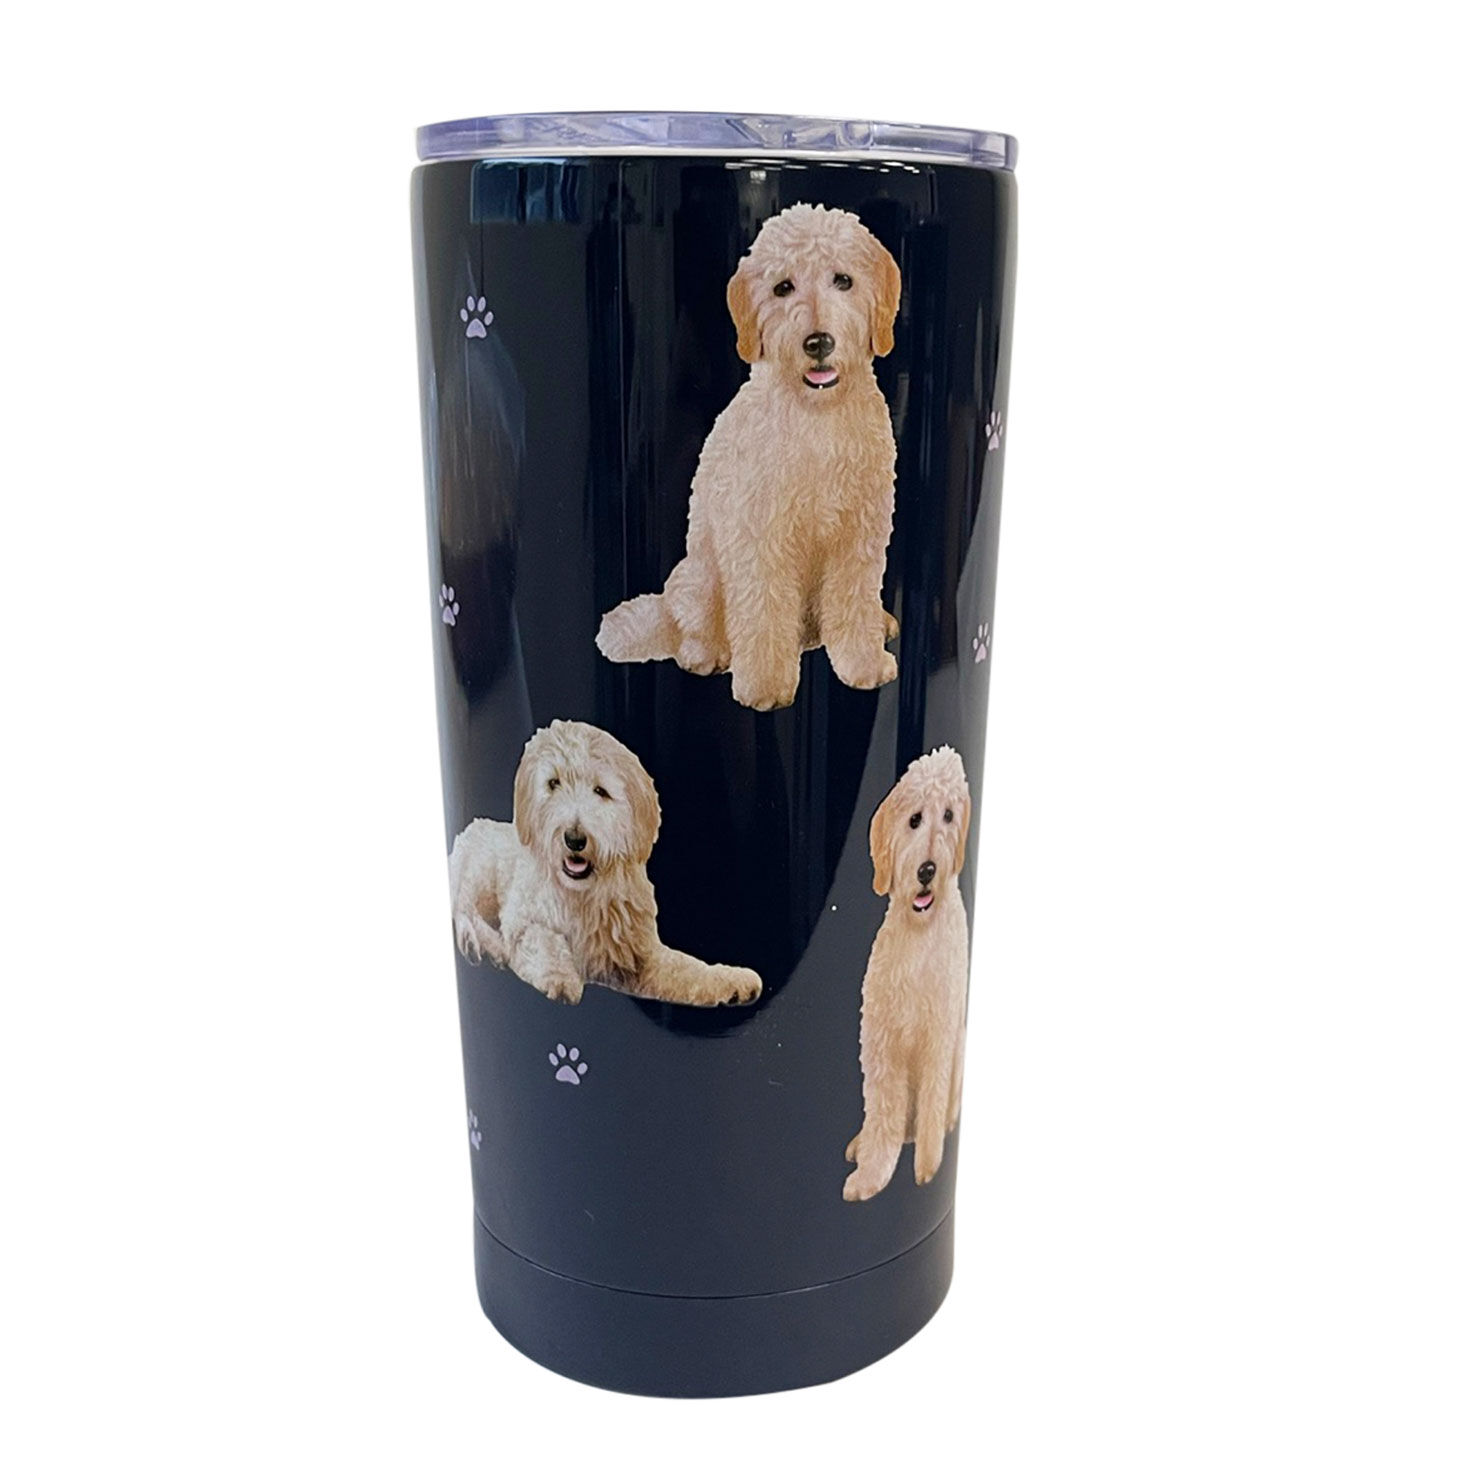 https://www.hallmark.com/dw/image/v2/AALB_PRD/on/demandware.static/-/Sites-hallmark-master/default/dw3fc3dd5a/images/finished-goods/products/115134/Goldendoodles-on-Black-Stainless-Steel-Tumble_115134_01.jpg?sfrm=jpg